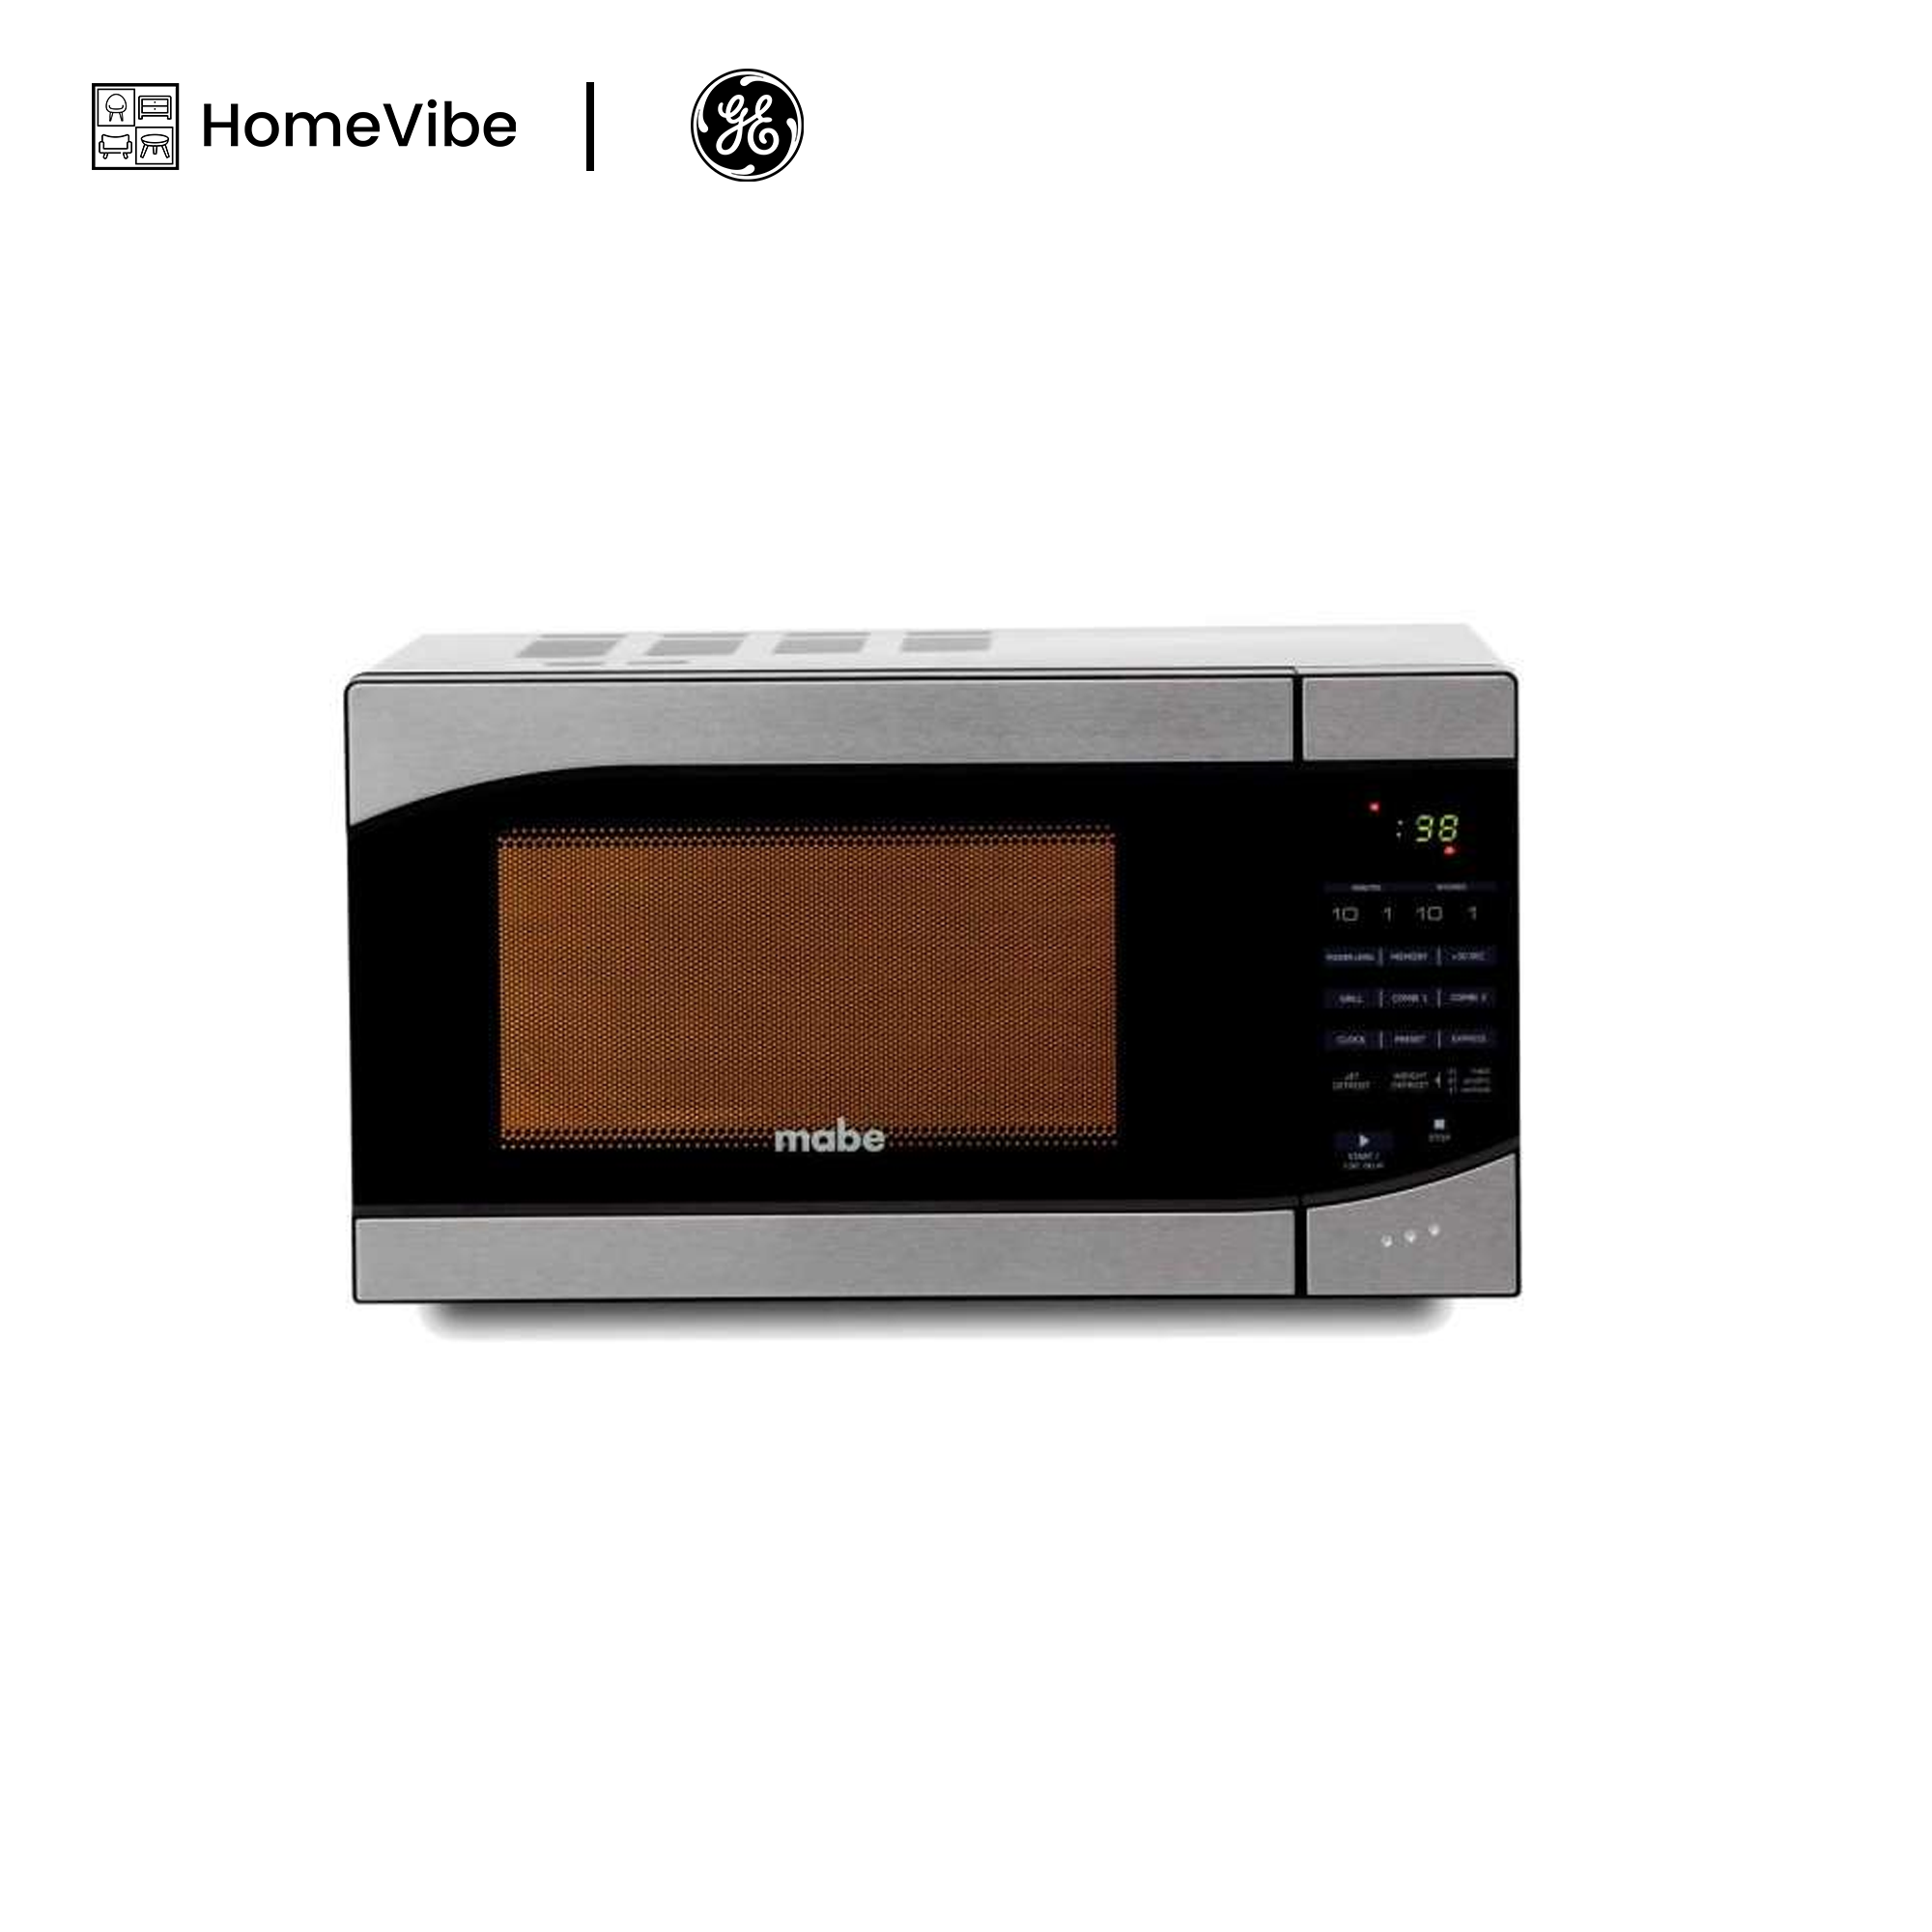 Mabe 25L/ 0.9cuft Capacity Digital Control Countertop Microwave Oven MEI2570DVSB with Grill function